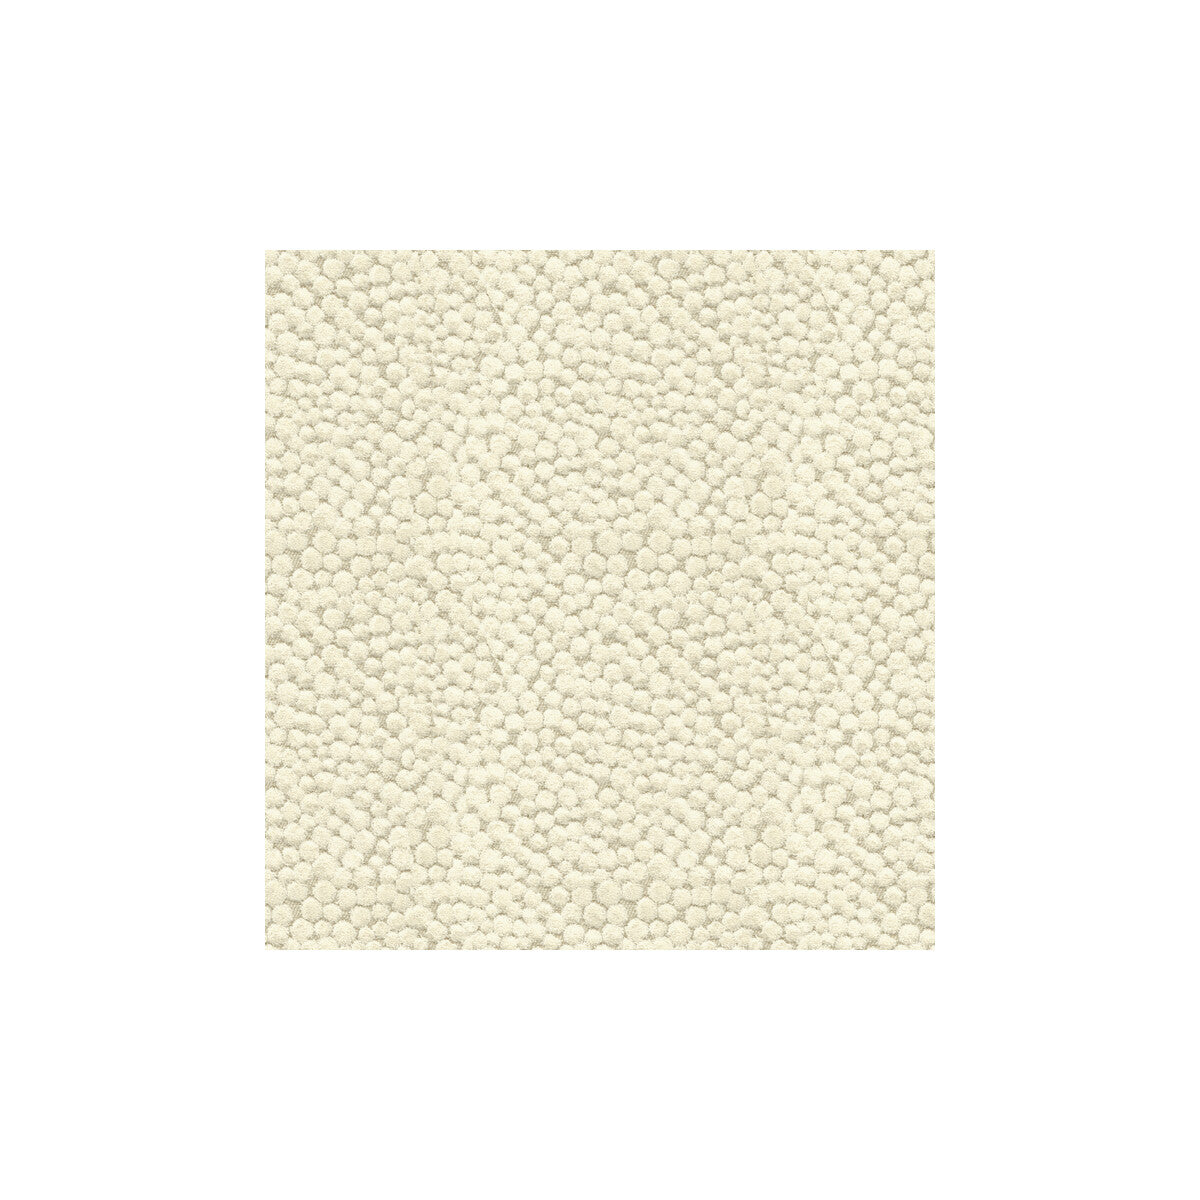 Lembury fabric in ivory color - pattern PF50300.104.0 - by Baker Lifestyle in the Denbury collection